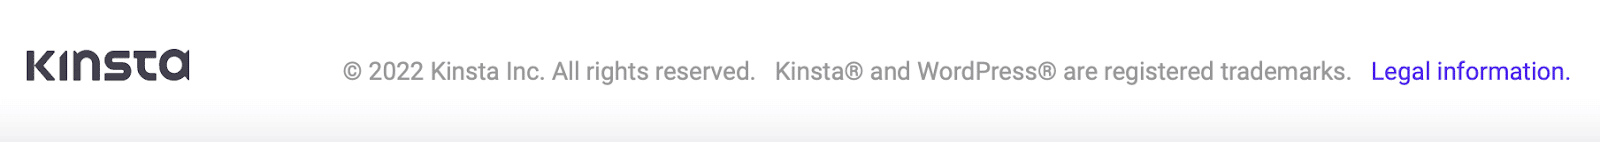 Kinsta’s copyright notice in the footer of the website